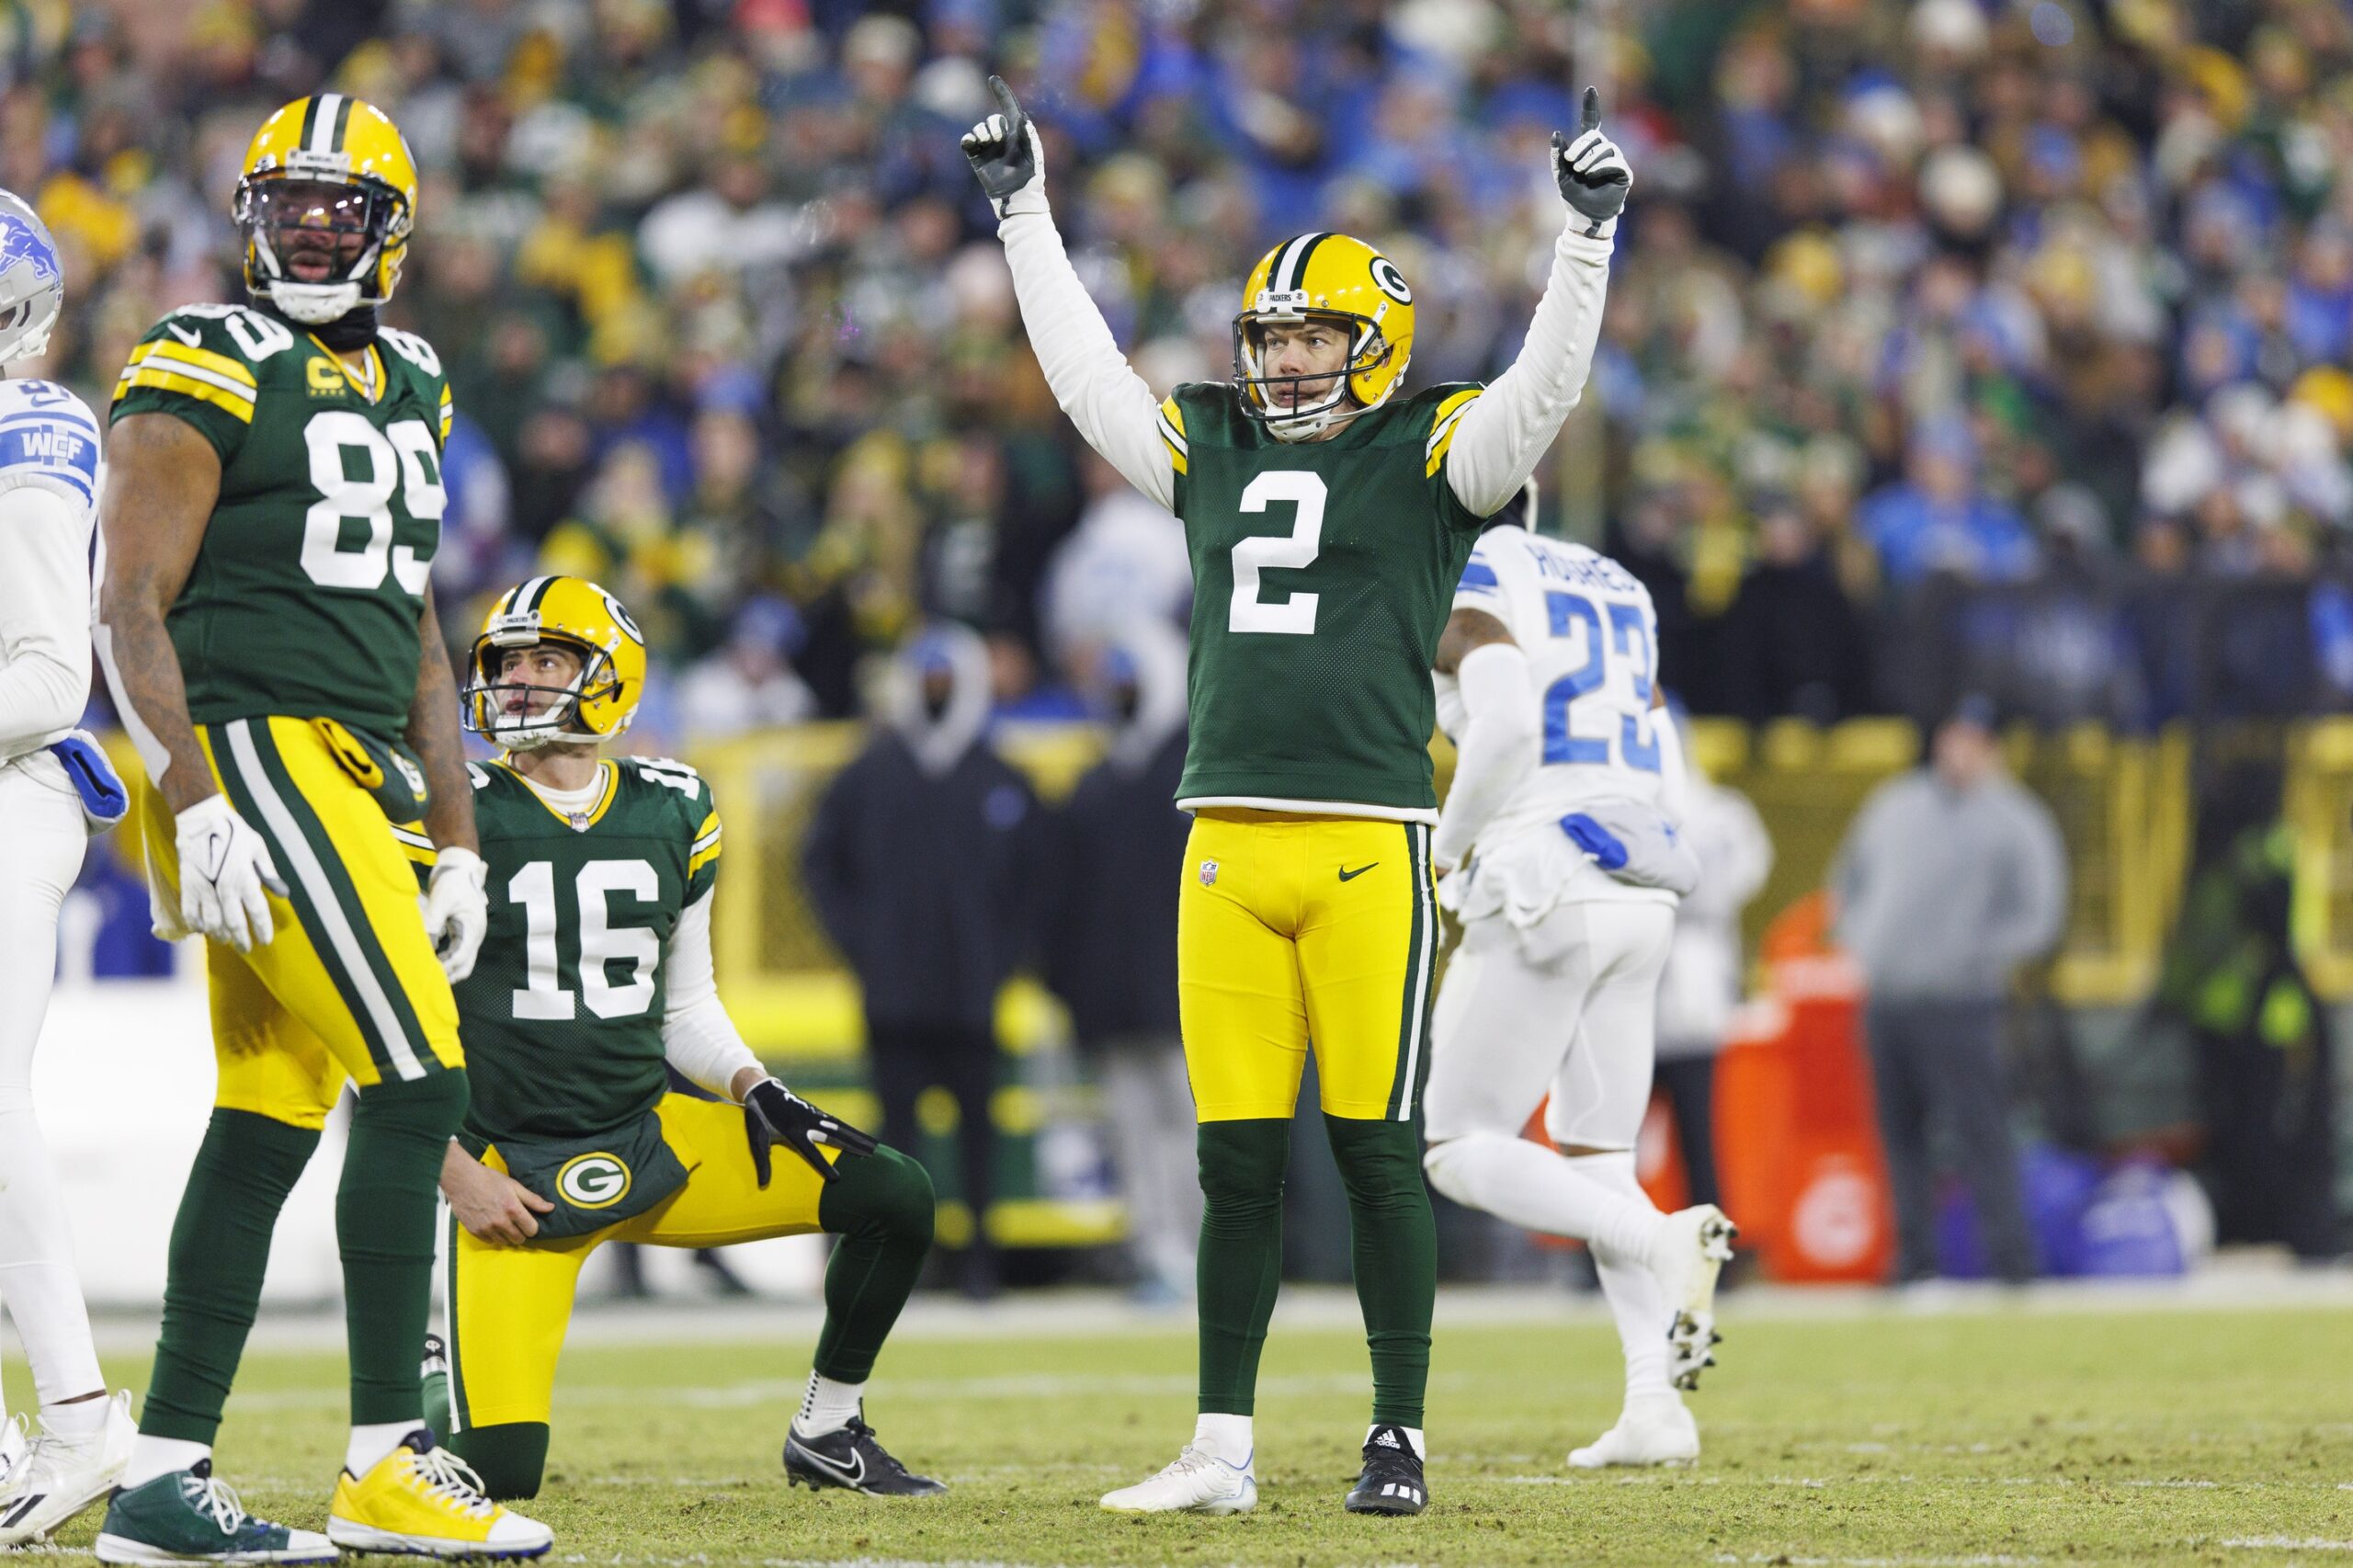 Mason Crosby is the Green Bay Packers' all-time leading scorer